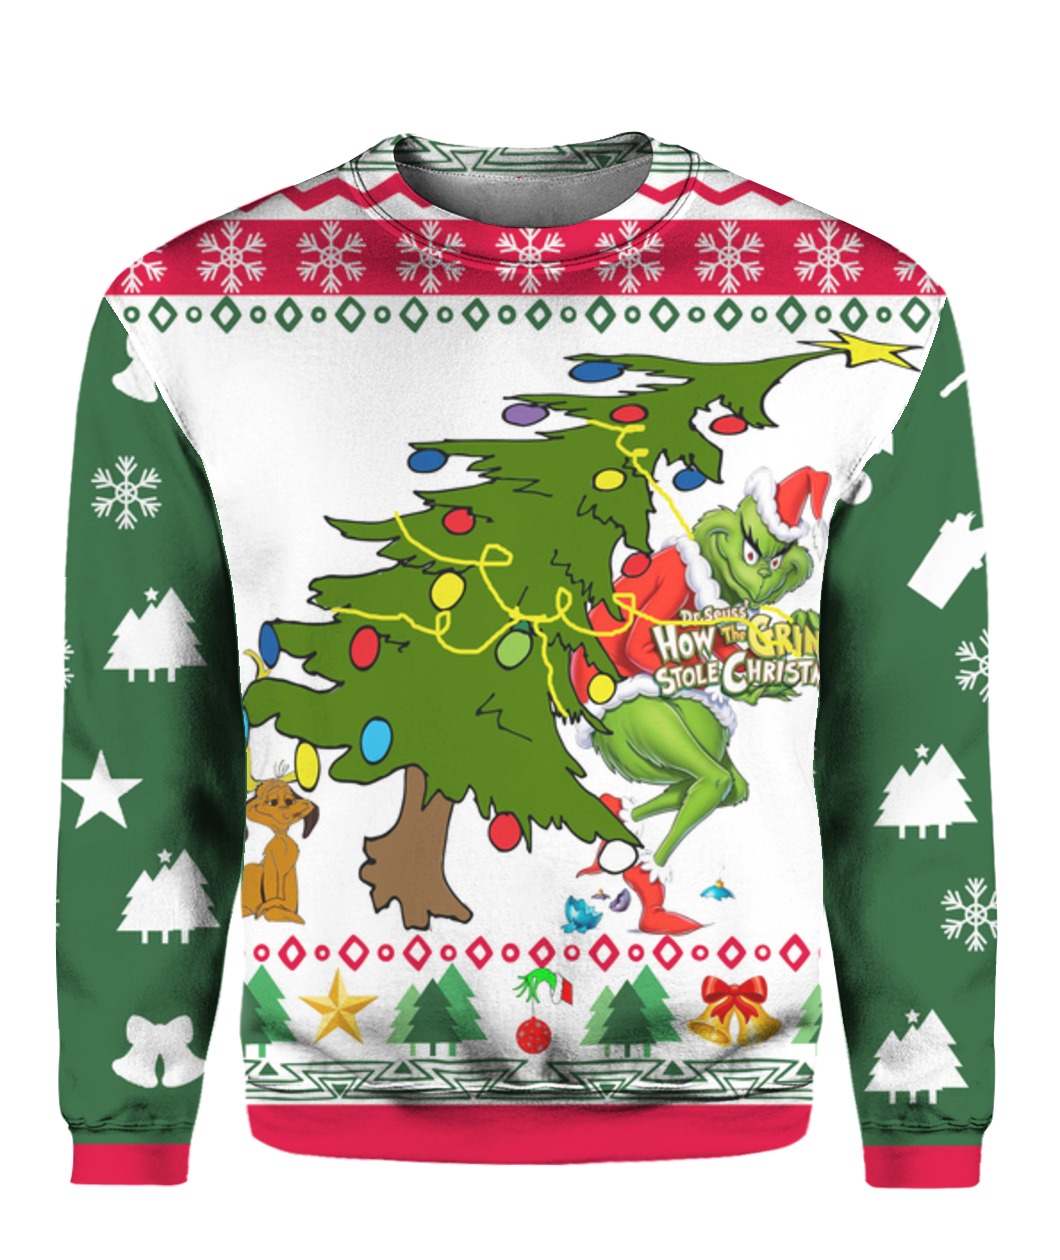 The grinch stole christmas tree full printing ugly christmas sweater – maria